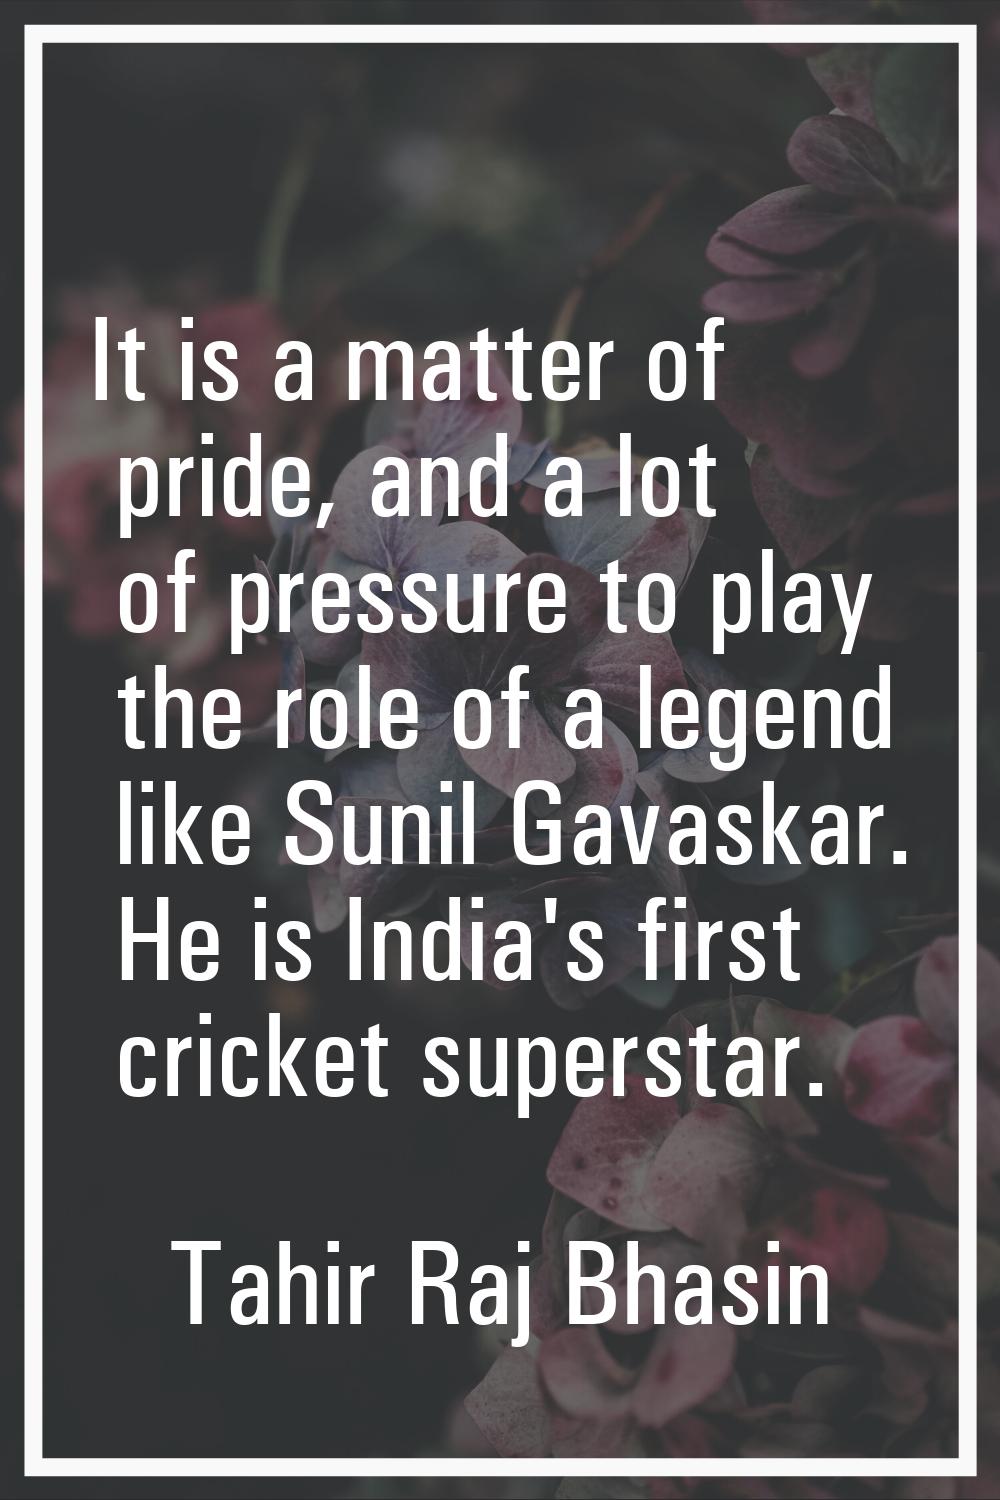 It is a matter of pride, and a lot of pressure to play the role of a legend like Sunil Gavaskar. He